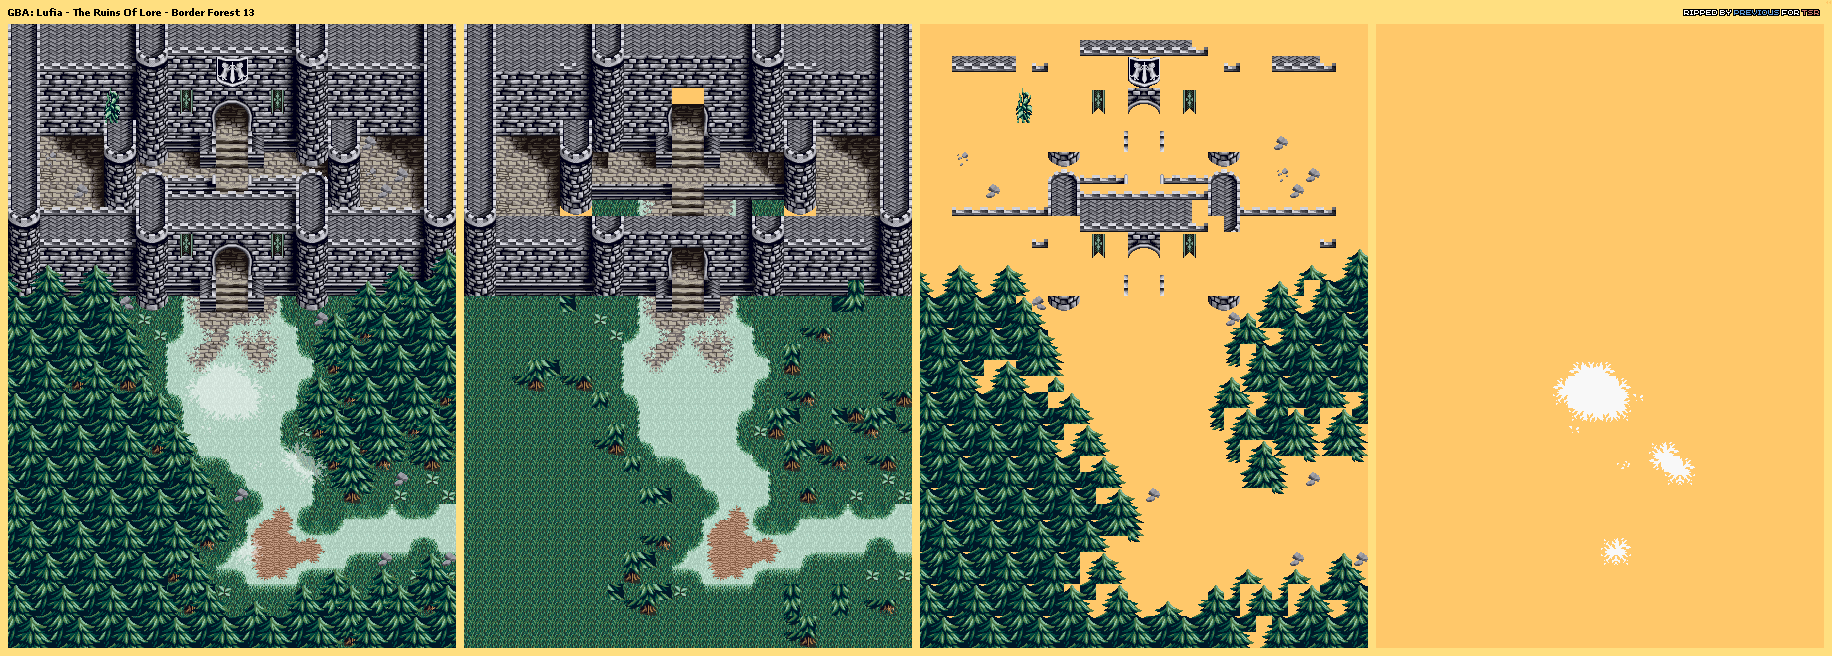 Lufia: The Ruins of Lore - Border Forest 13